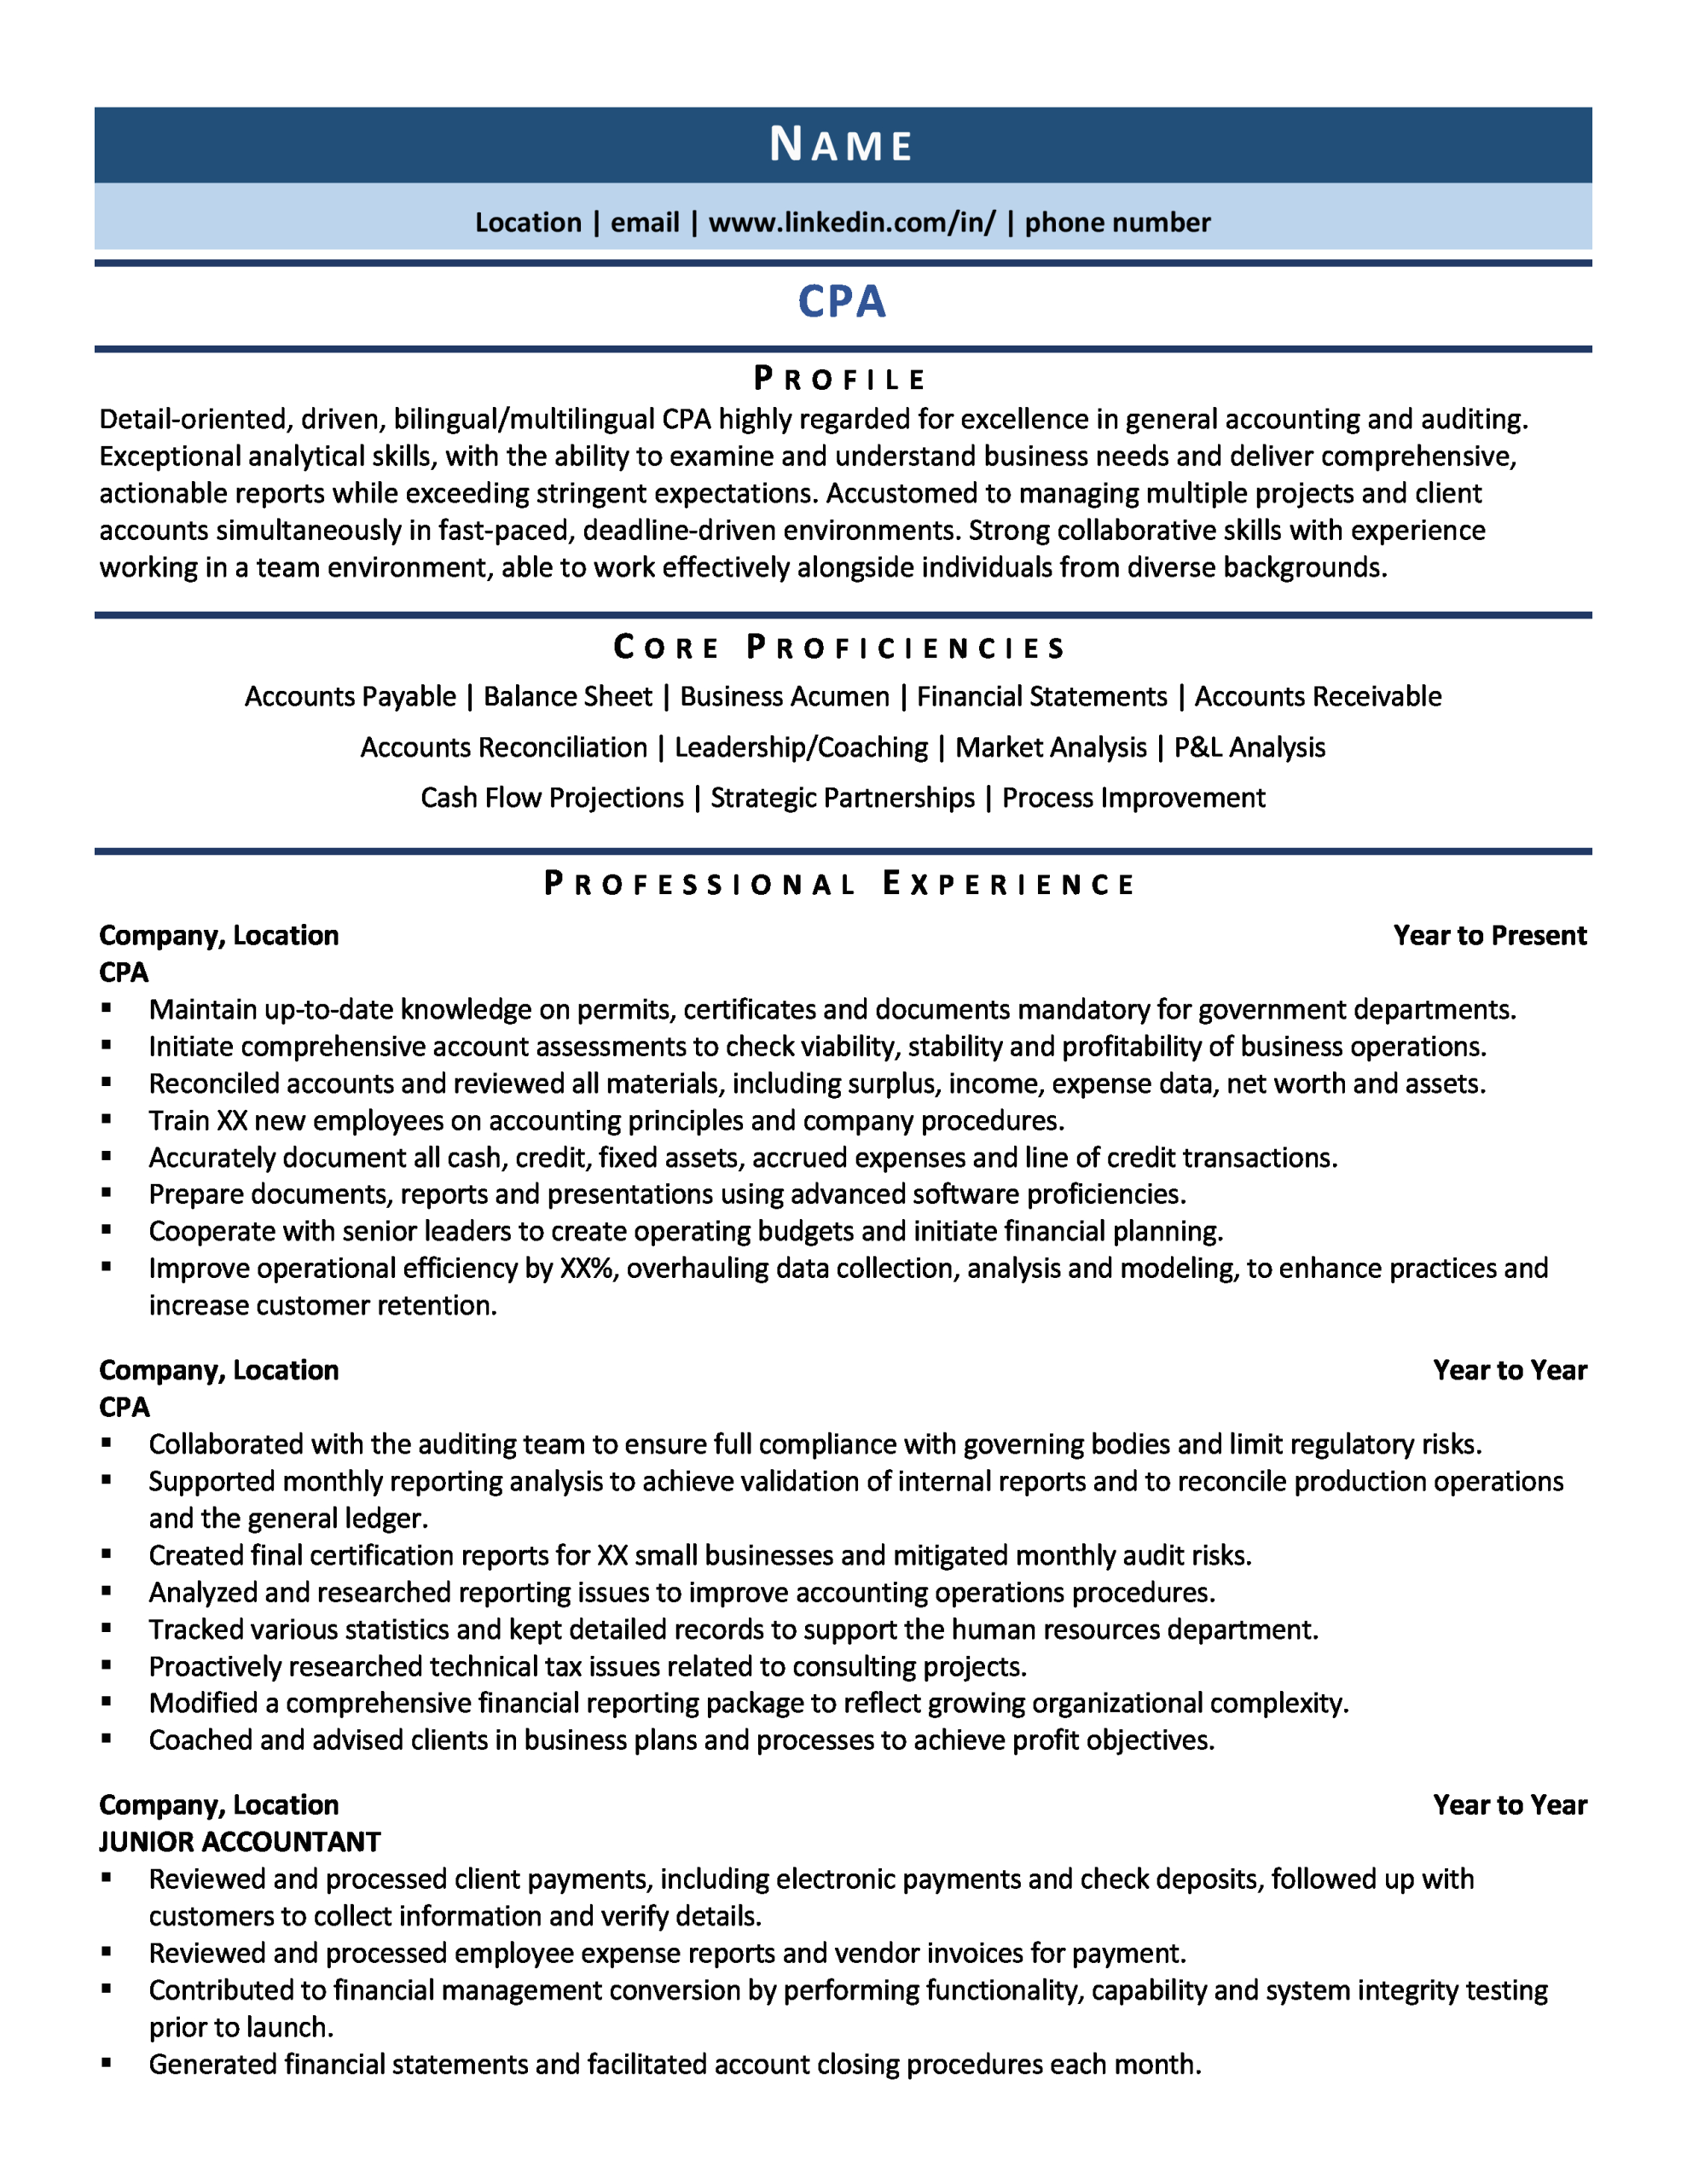 Bookkeeper In Public Accounting Resume Sample Certified Public Accountant Cpa Resume Samples & Examples for 2020